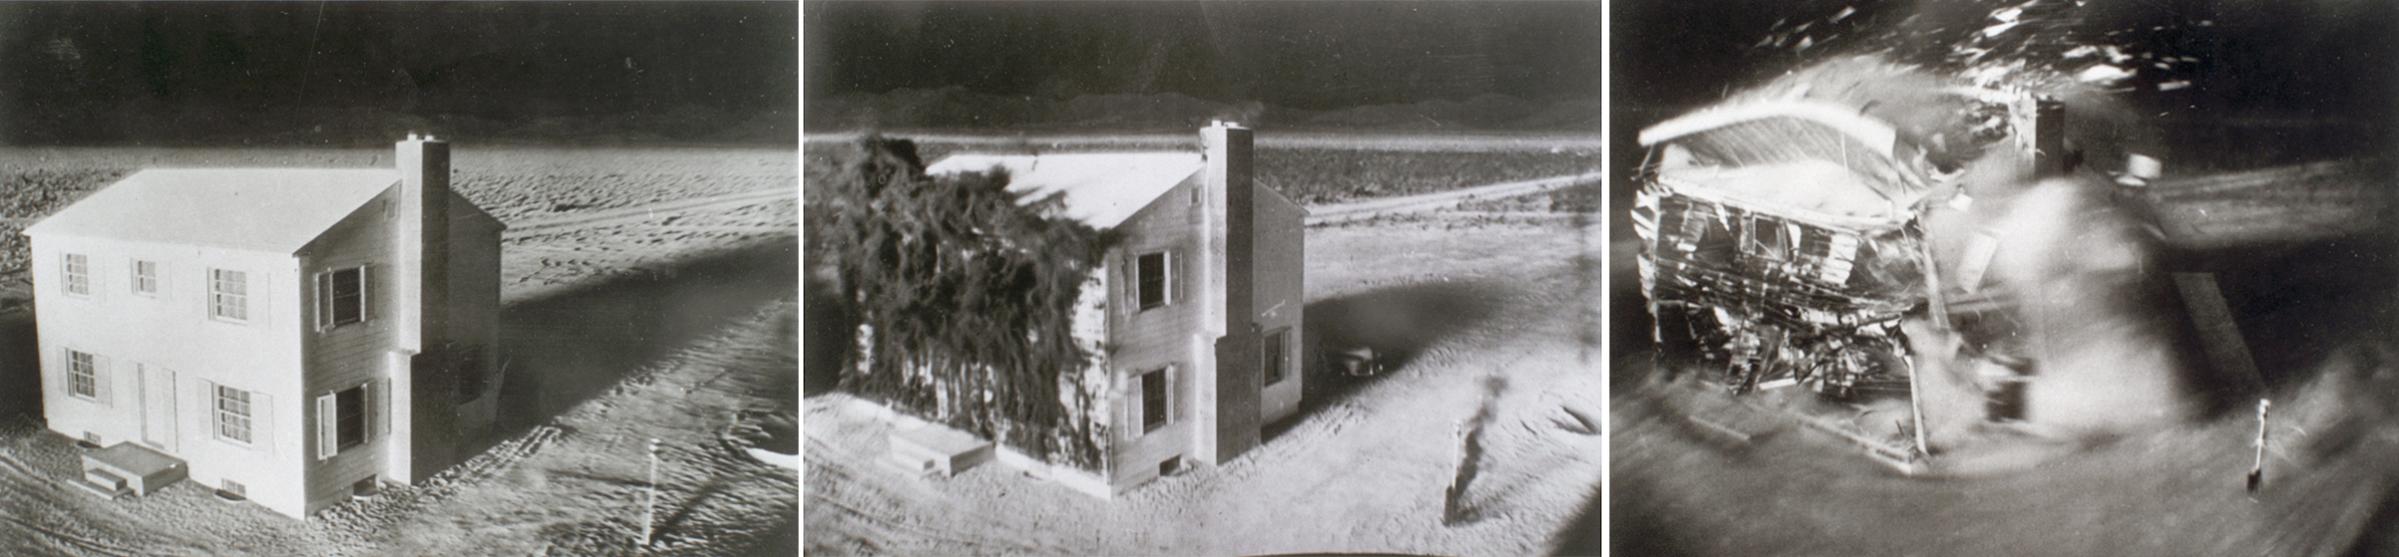 House in Nuclear Test Blast